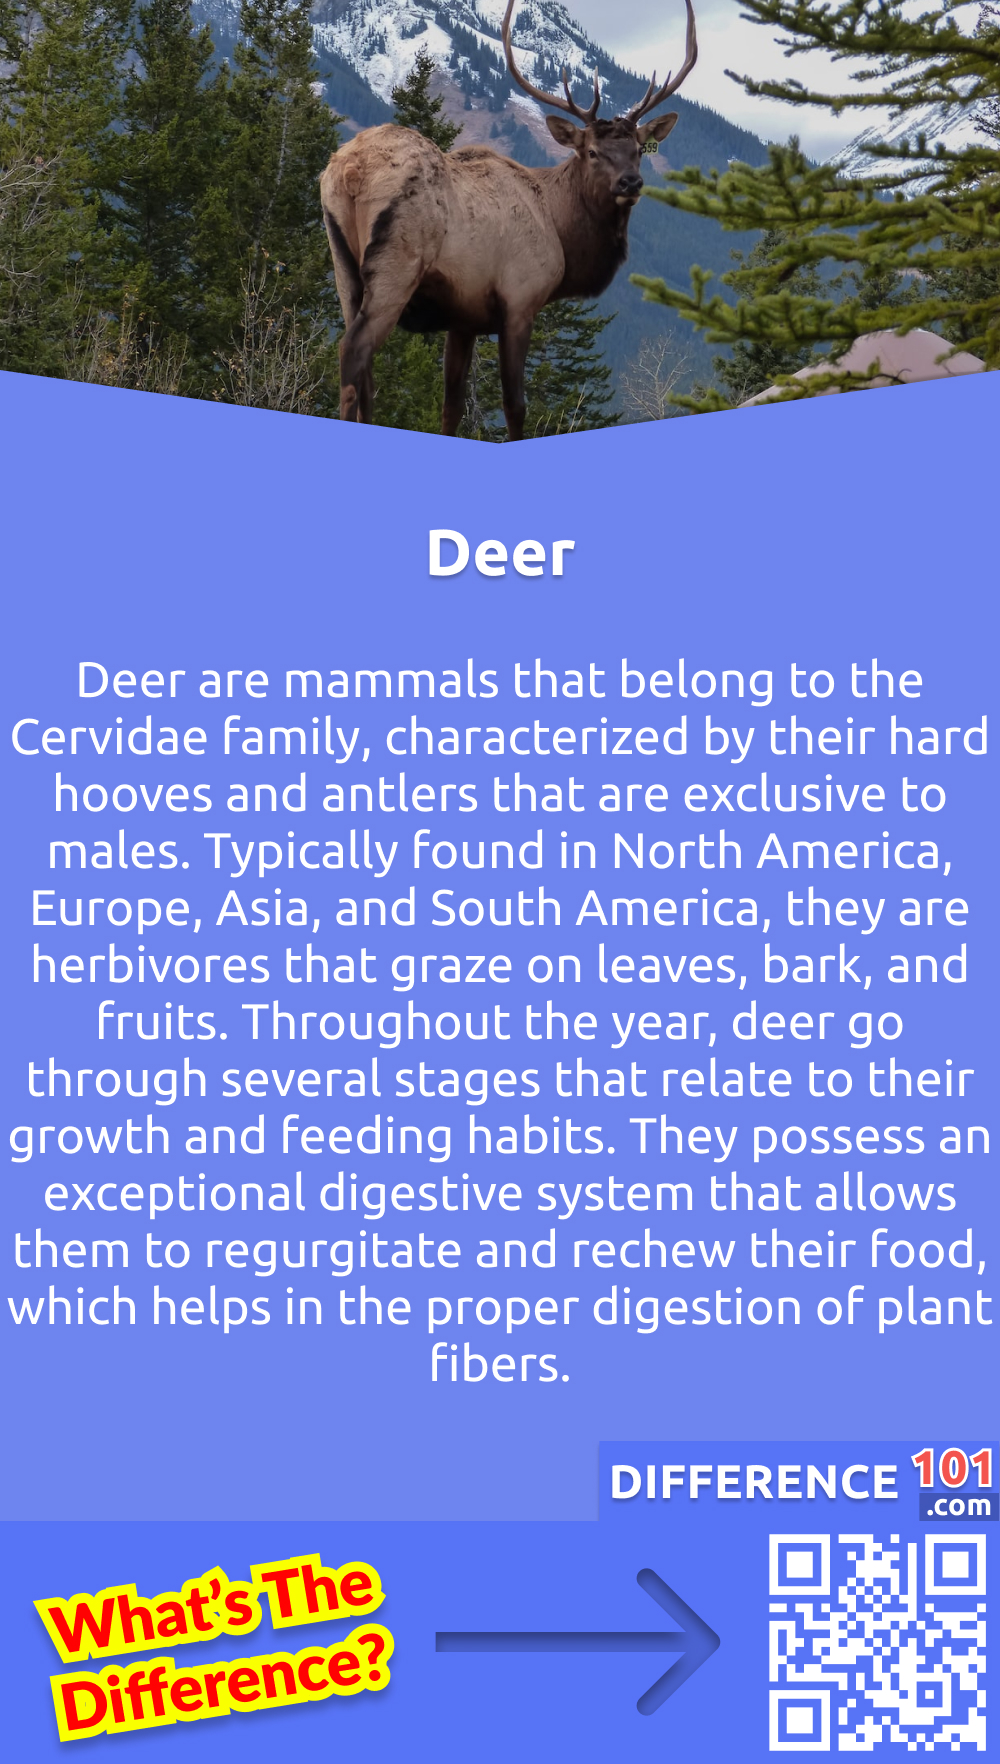 What Is Deer? Deer are mammals that belong to the Cervidae family, characterized by their hard hooves and antlers that are exclusive to males. Typically found in North America, Europe, Asia, and South America, they are herbivores that graze on leaves, bark, and fruits. Throughout the year, deer go through several stages that relate to their growth and feeding habits. They possess an exceptional digestive system that allows them to regurgitate and rechew their food, which helps in the proper digestion of plant fibers. They are also known for their agility and speed, enabling them to escape from predators easily. Due to their graceful and impressive appearance, deer have become widespread in the cultural fabric of many societies, especially in myths and folklore.